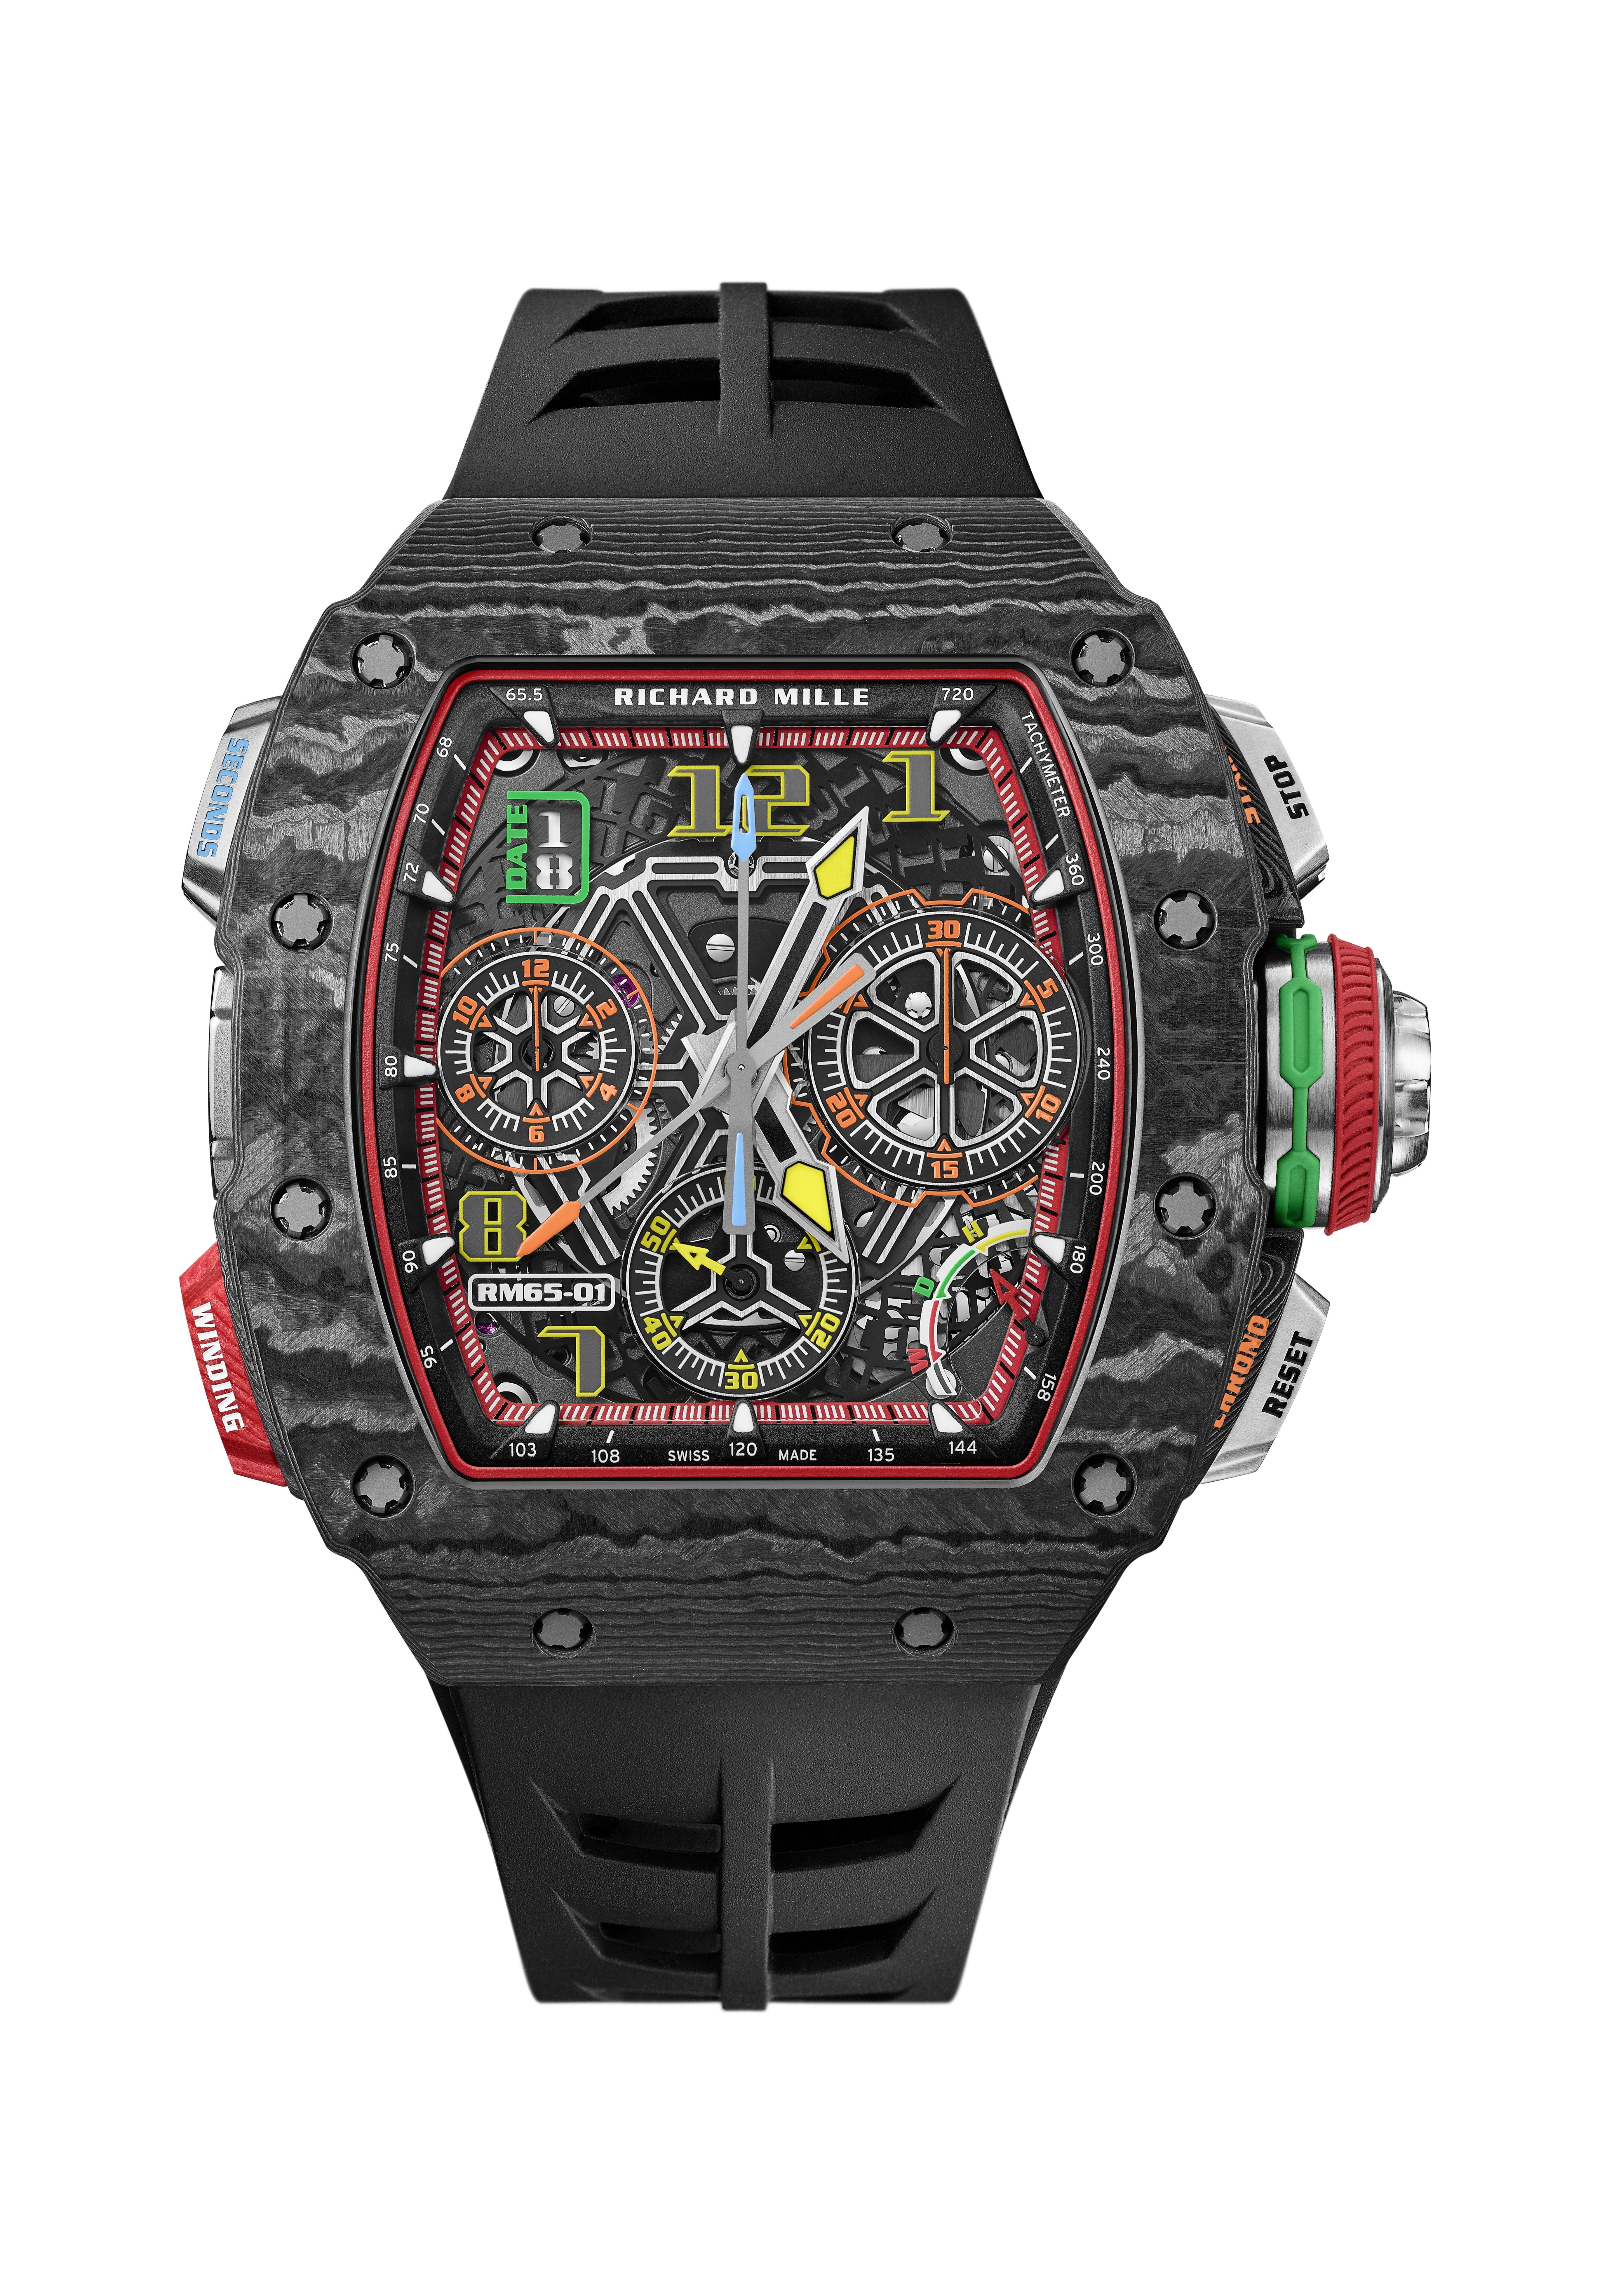 Style Edit Introducing Richard Mille S Superfast New Rm65 01 Automatic Split Seconds Chronograph South China Morning Post